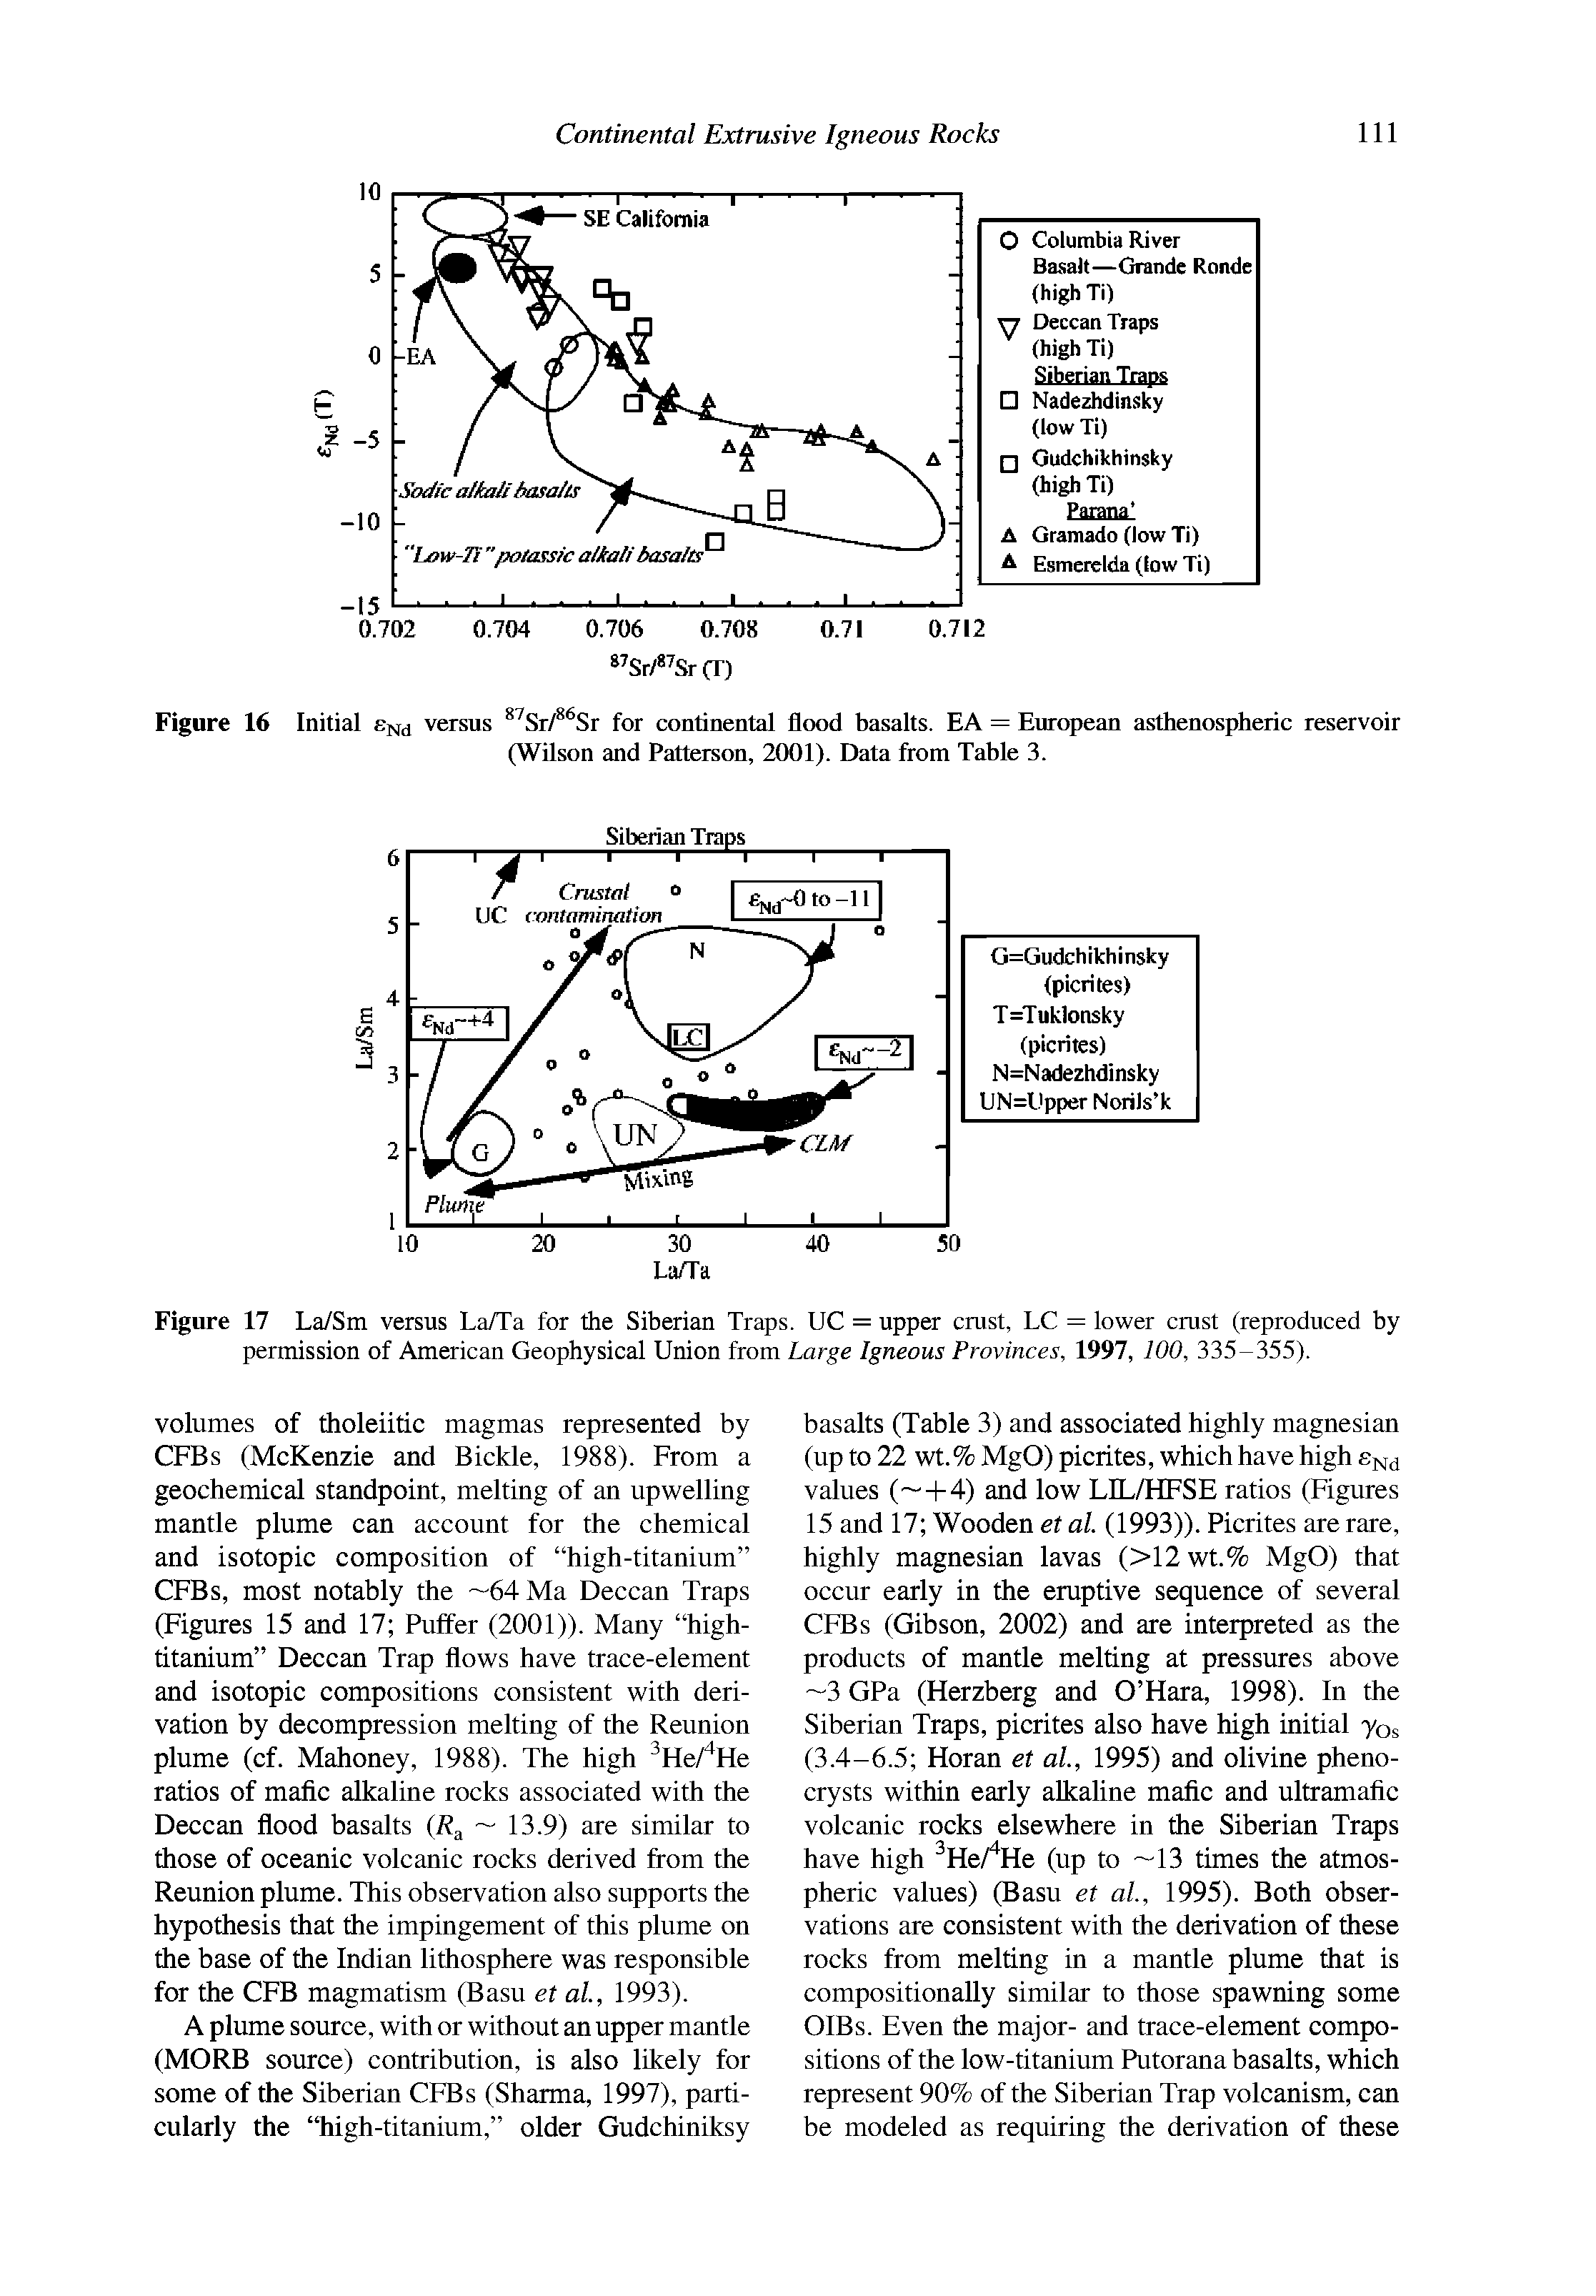 Figure 17 La/Sm versus La/Ta for the Siberian Traps. UC = upper crust, LC = lower crust (reproduced by permission of American Geophysical Union from Large Igneous Provinces, 1997, 100, 335-355).